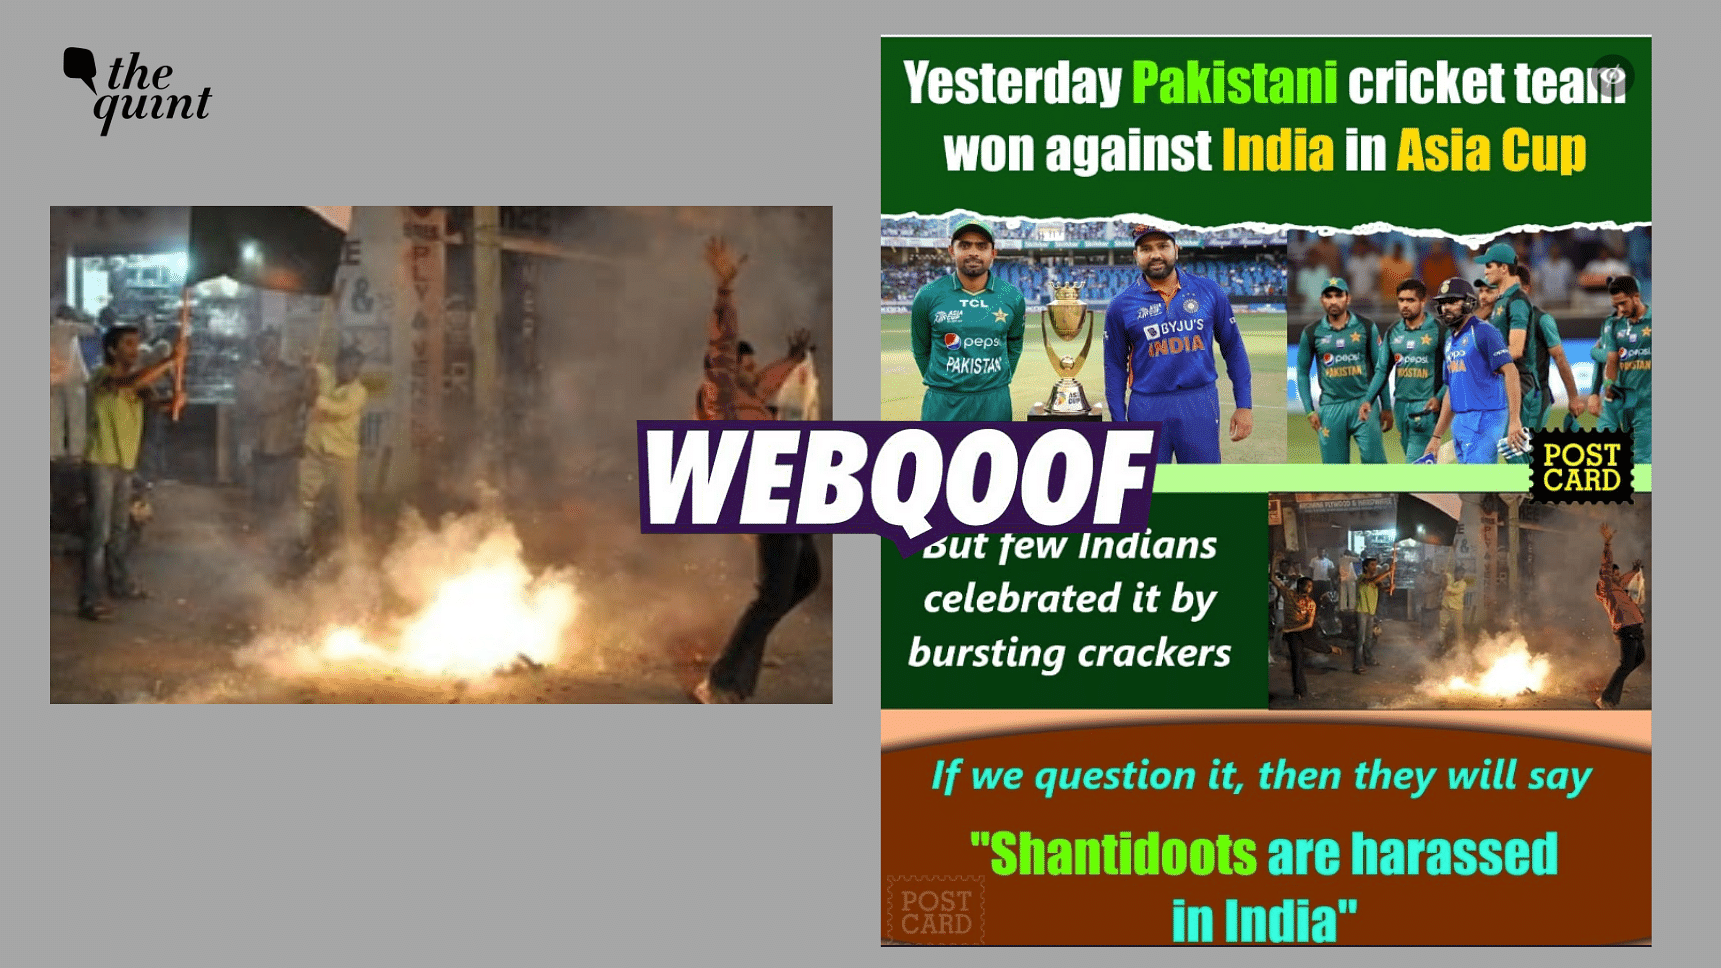 <div class="paragraphs"><p>The claim suggests that the Muslim community  celebrated after India lost to Pakistan in the Asia Cup tournament.</p></div>